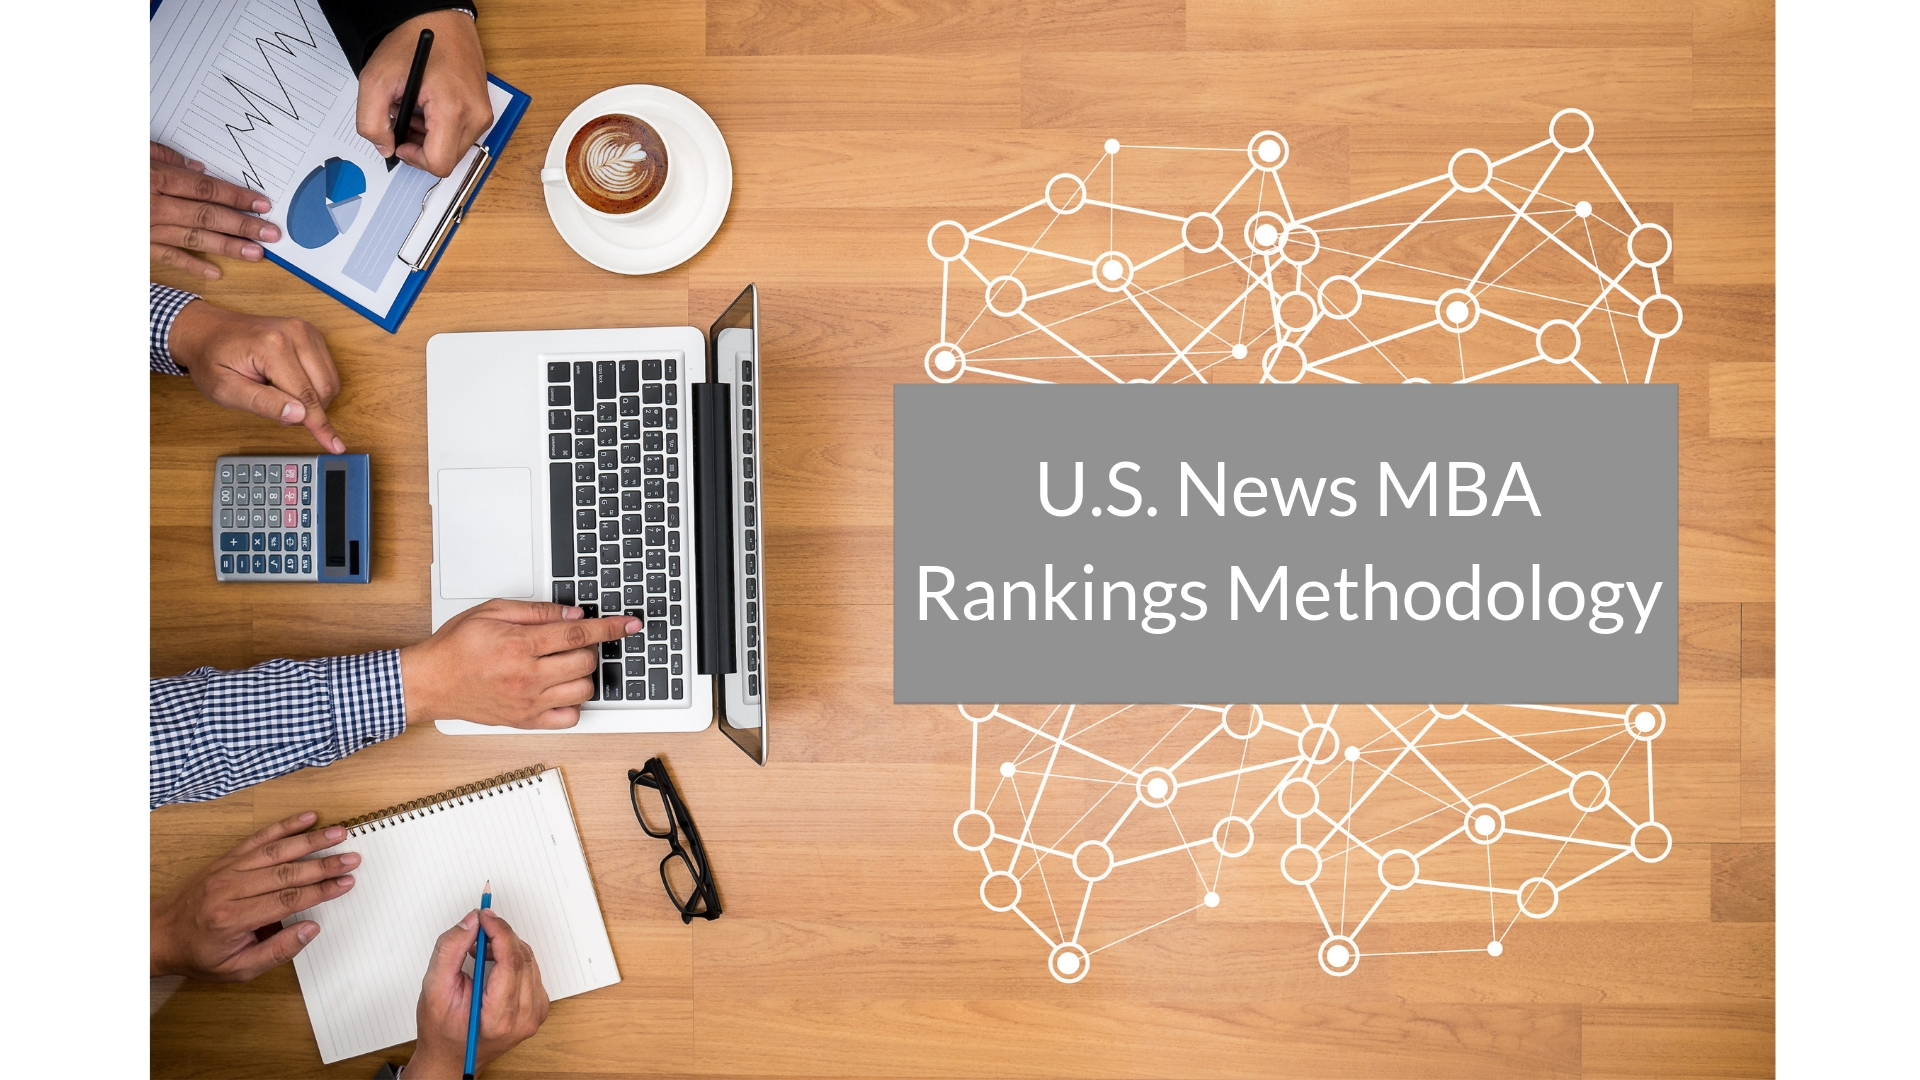 U.S. News MBA Rankings 2020 Analyzed and Decoded What it means for